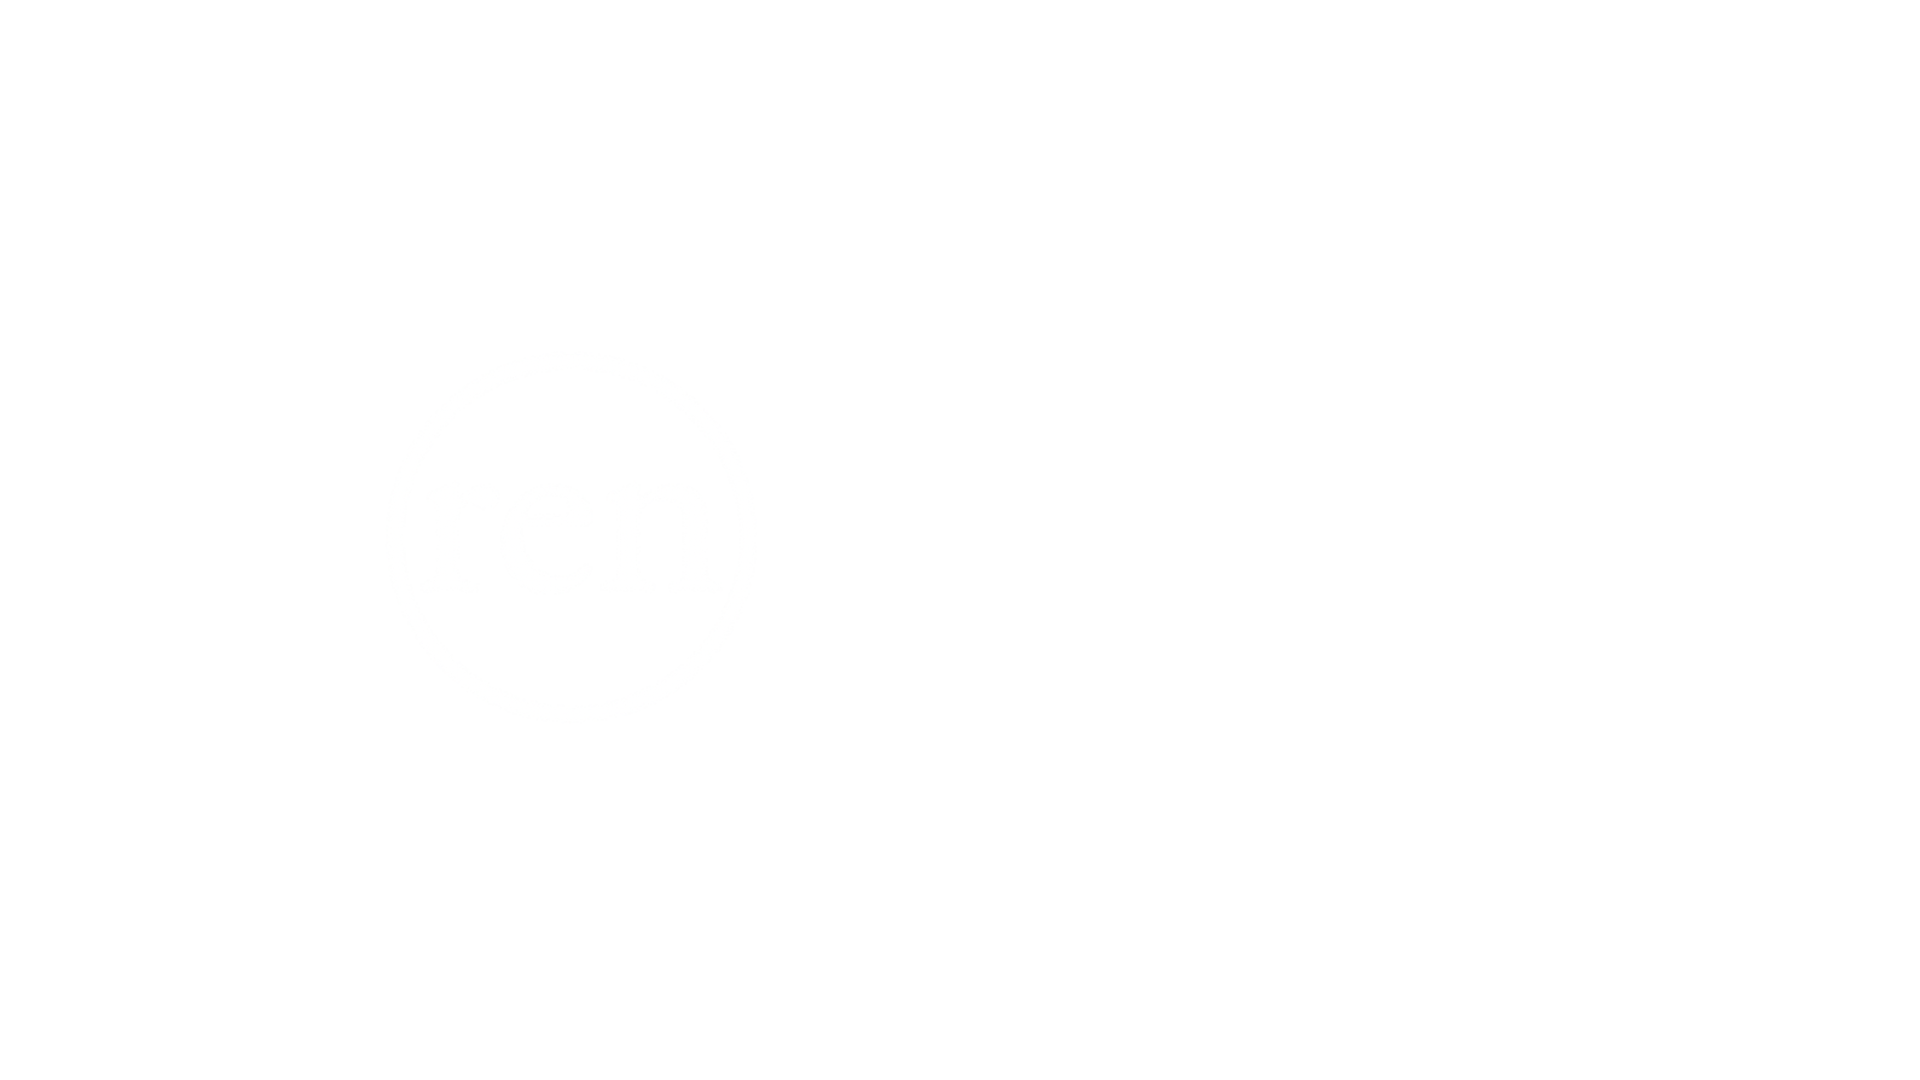 CARE CONNECTION - 3